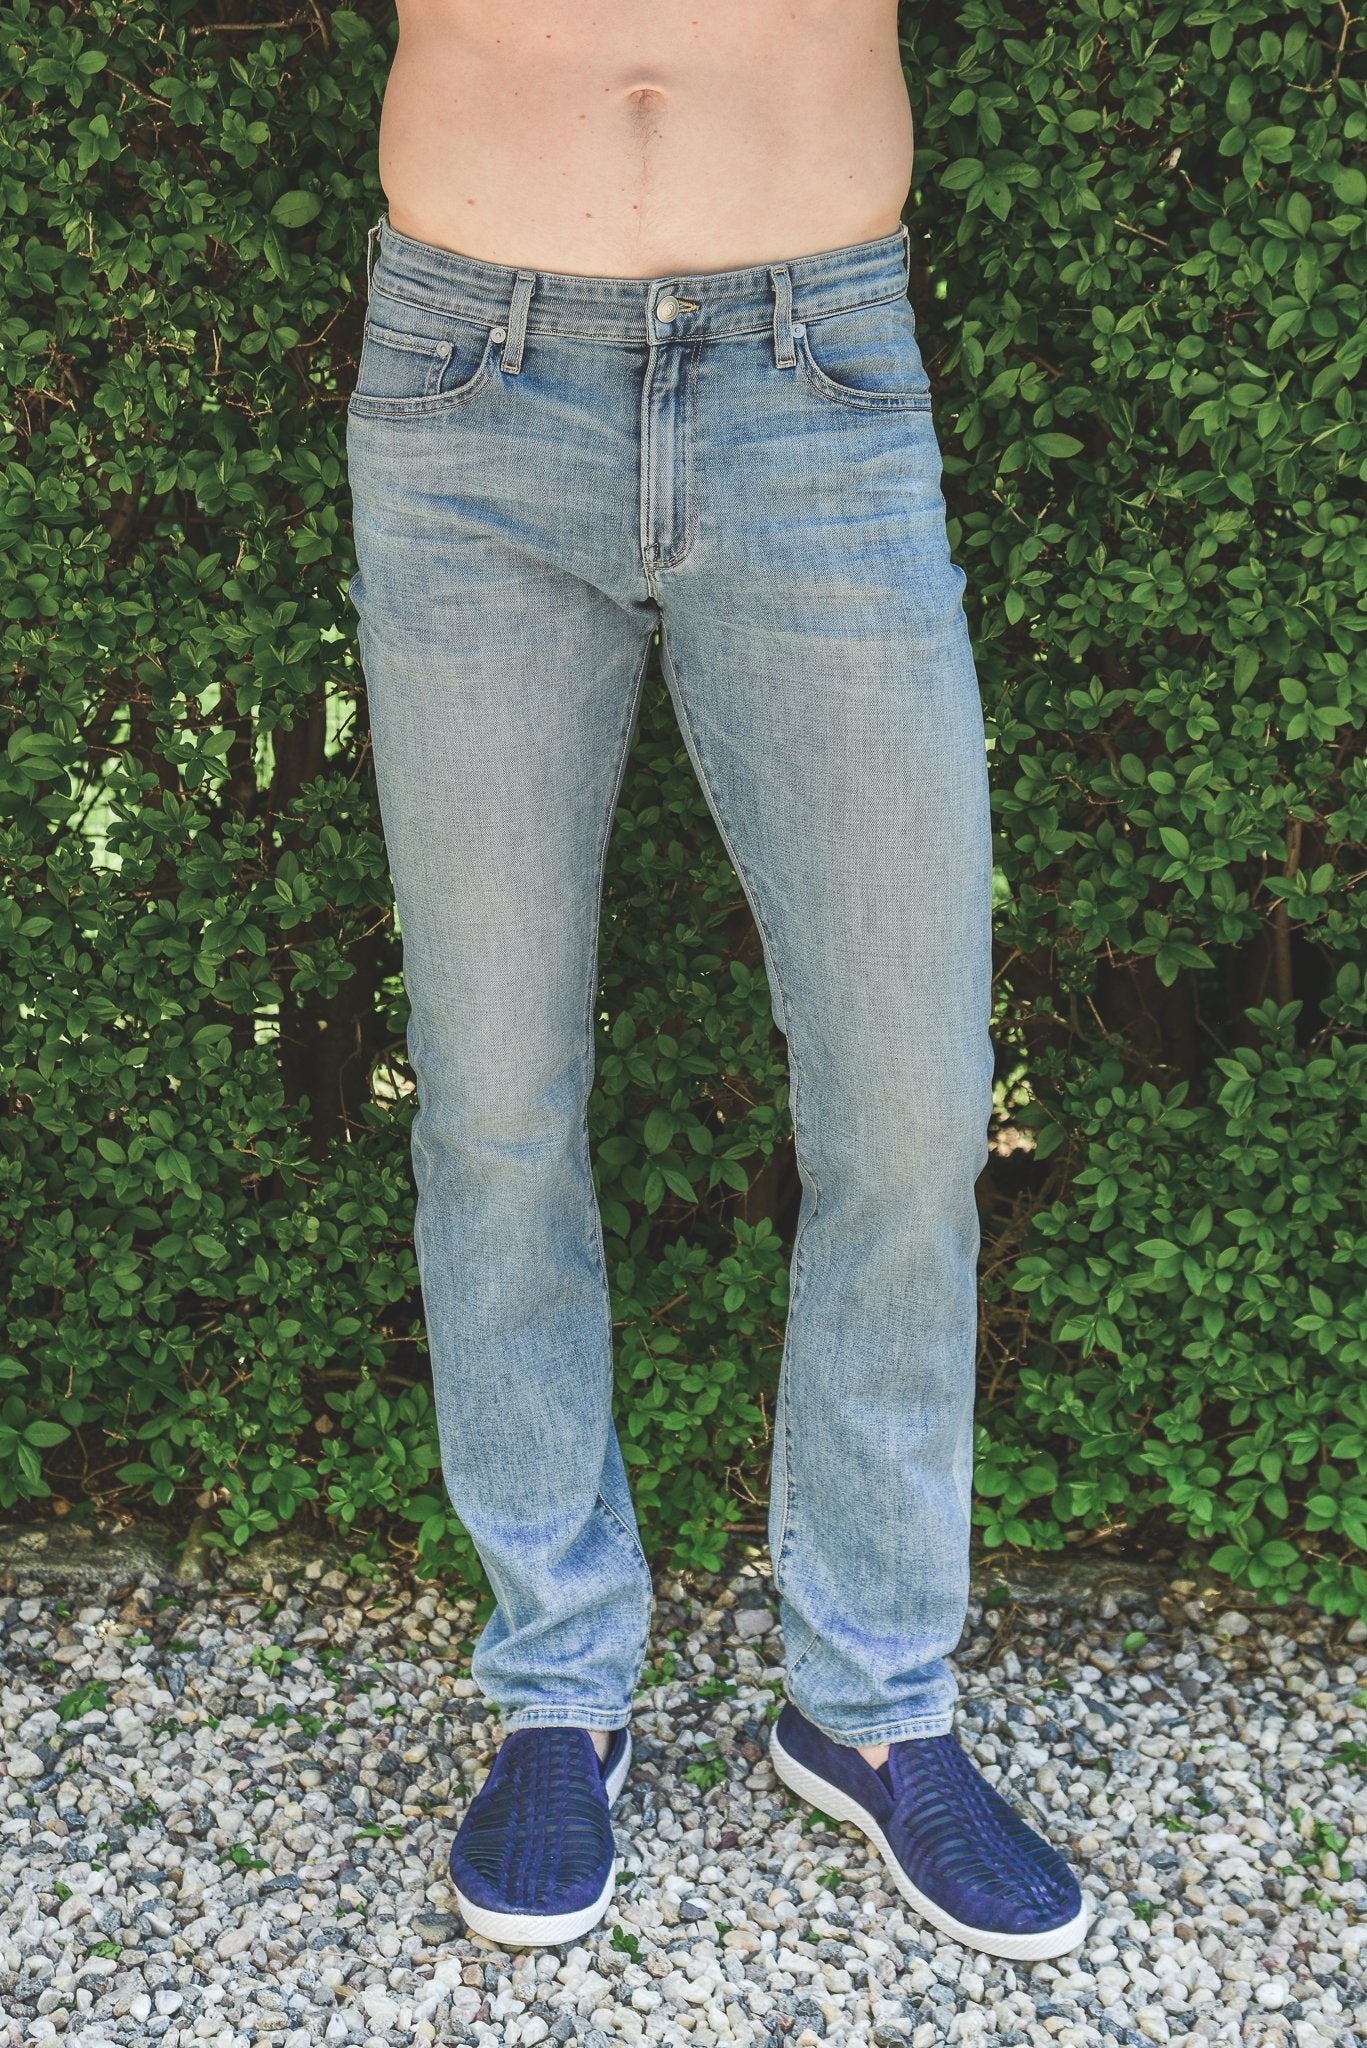 m and s slim jeans